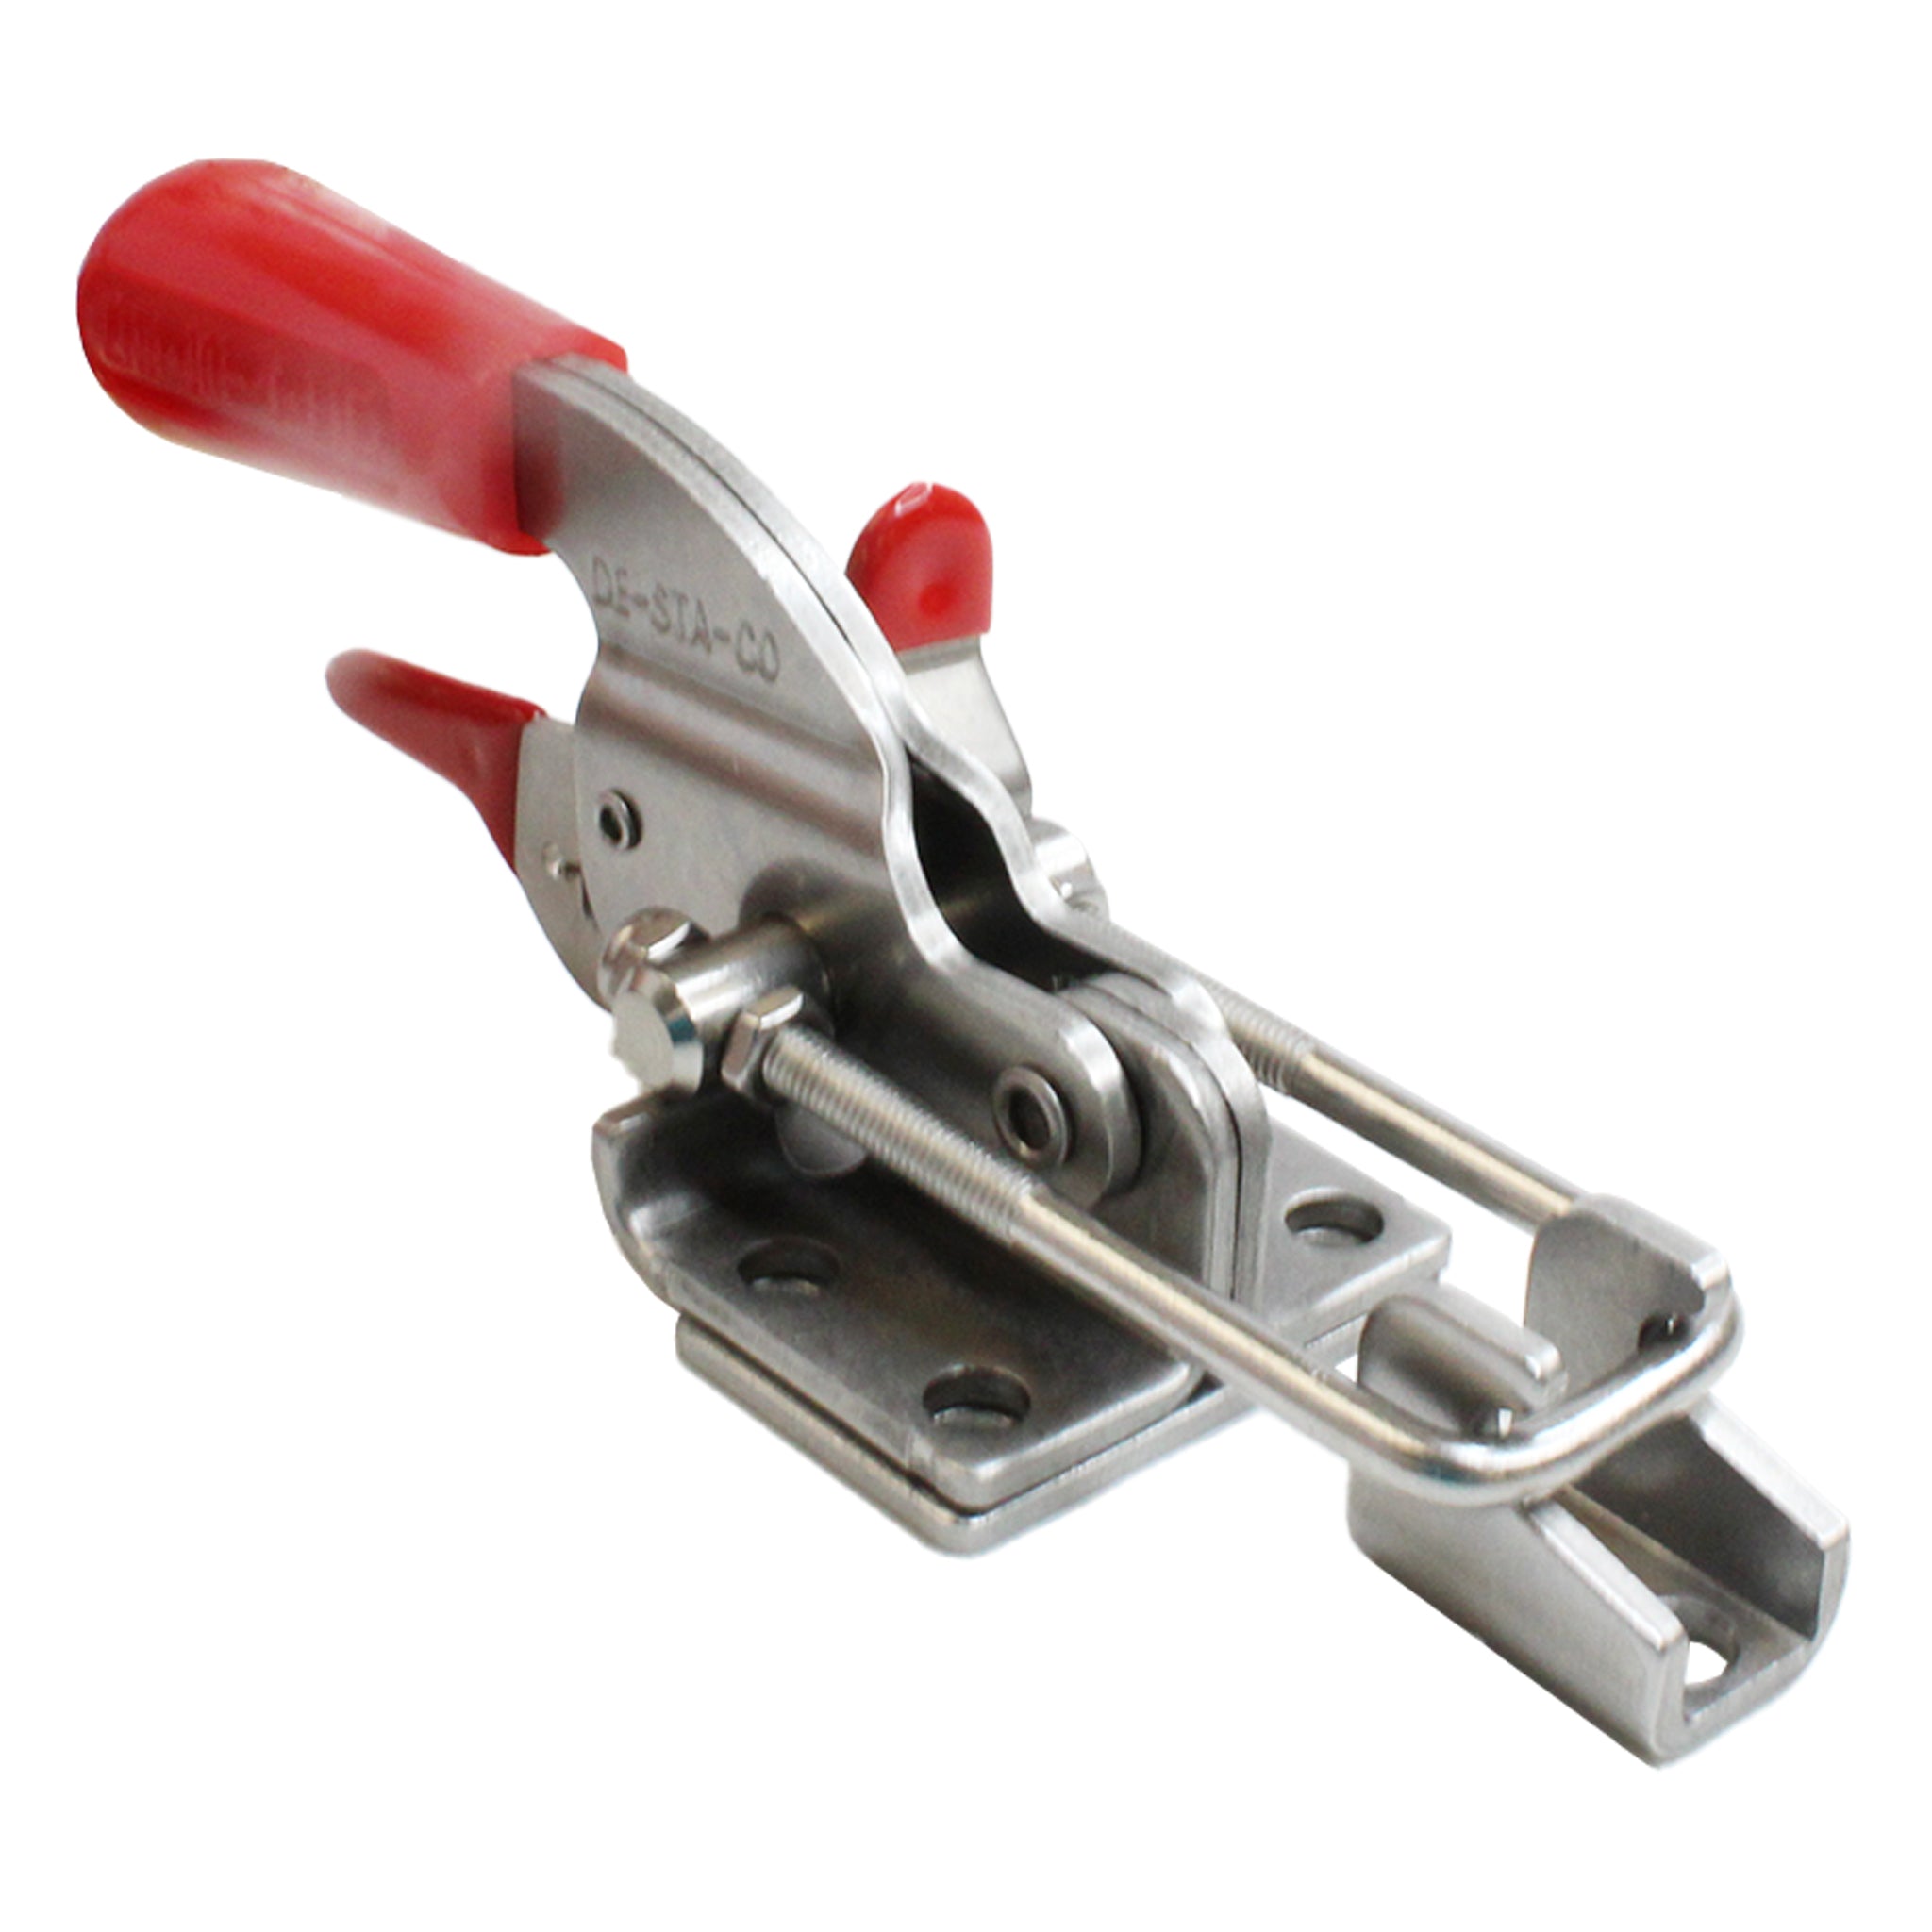 De-Sta-Co 331 Pull Action Latch Clamp with Latch Plate and U-Shaped Hook